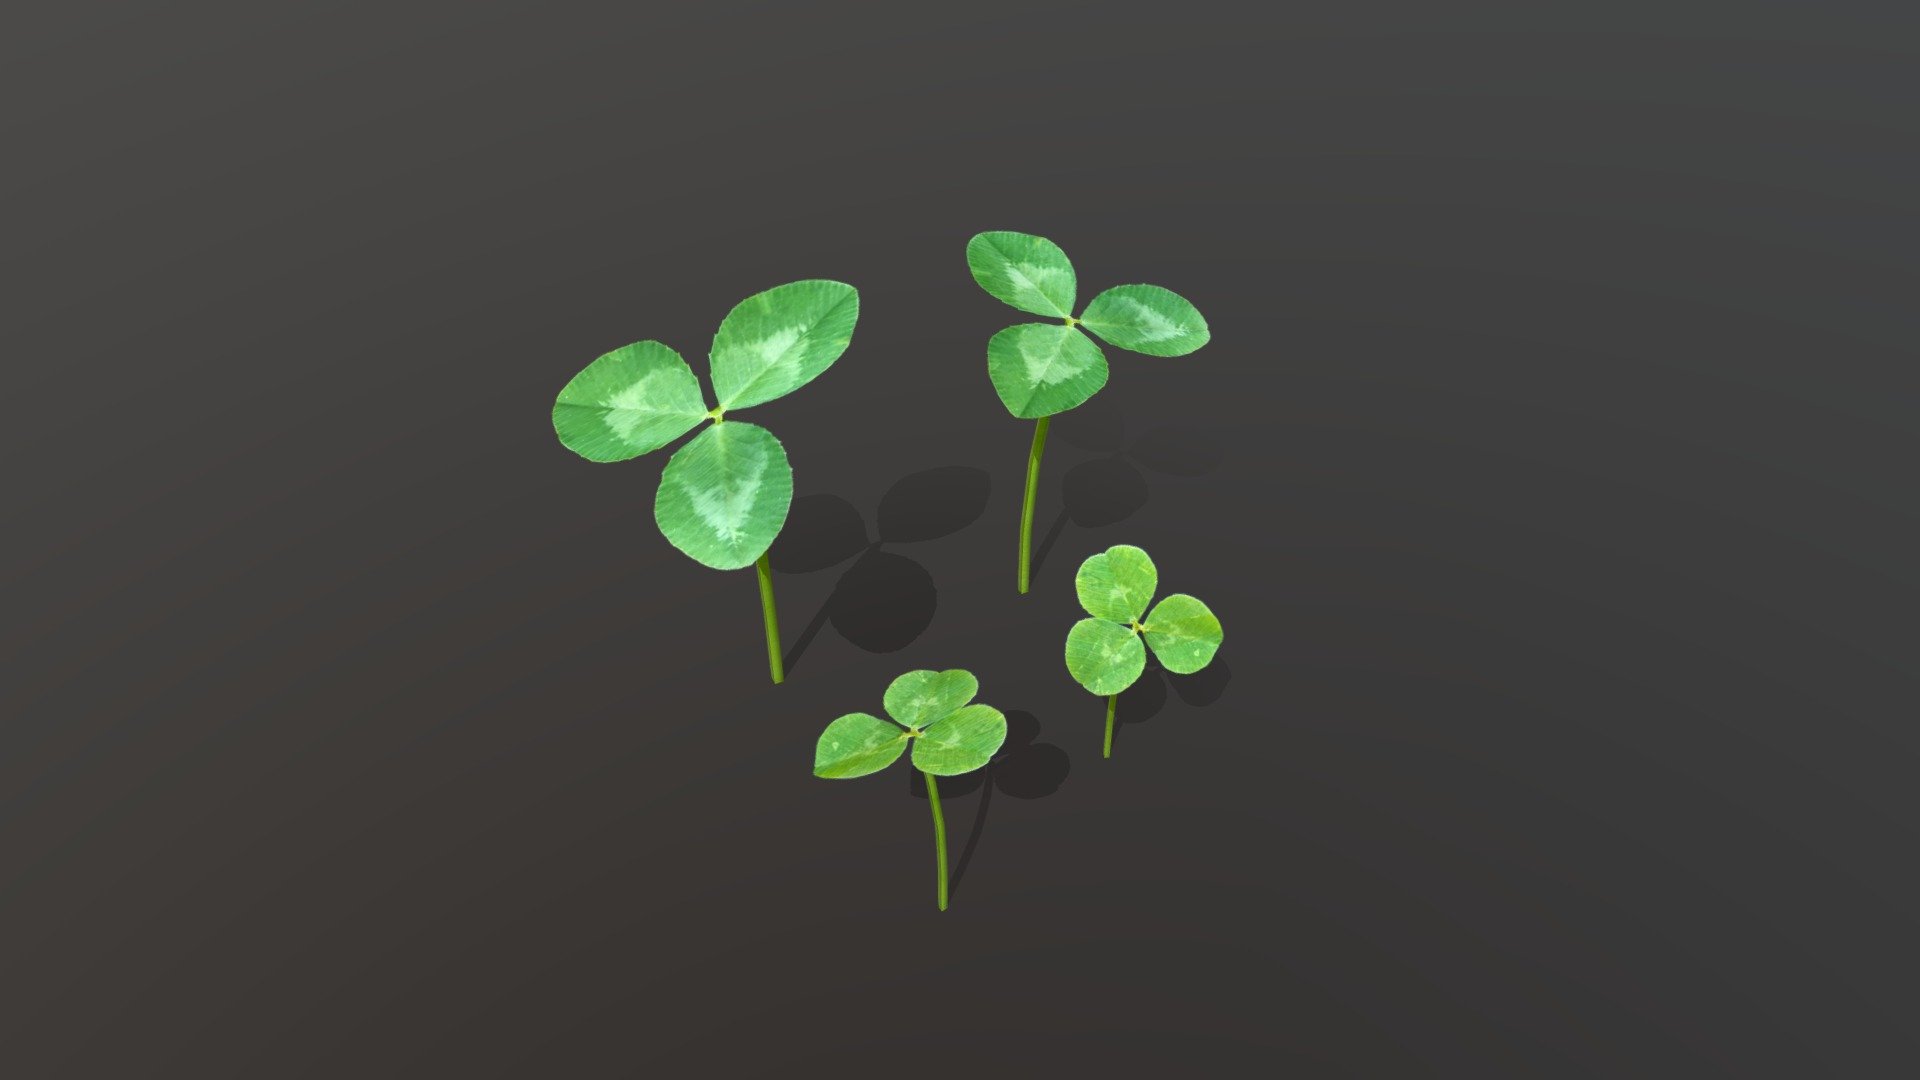 Trifolium repens, or white clover, is a herbaceous perennial plant in the bean family Fabaceae . It is native to Europe, including the British Isles, and central Asia.
The textures were created from photos of real clovers.

2048x2048 maps: color, roughness and opacity 3d model